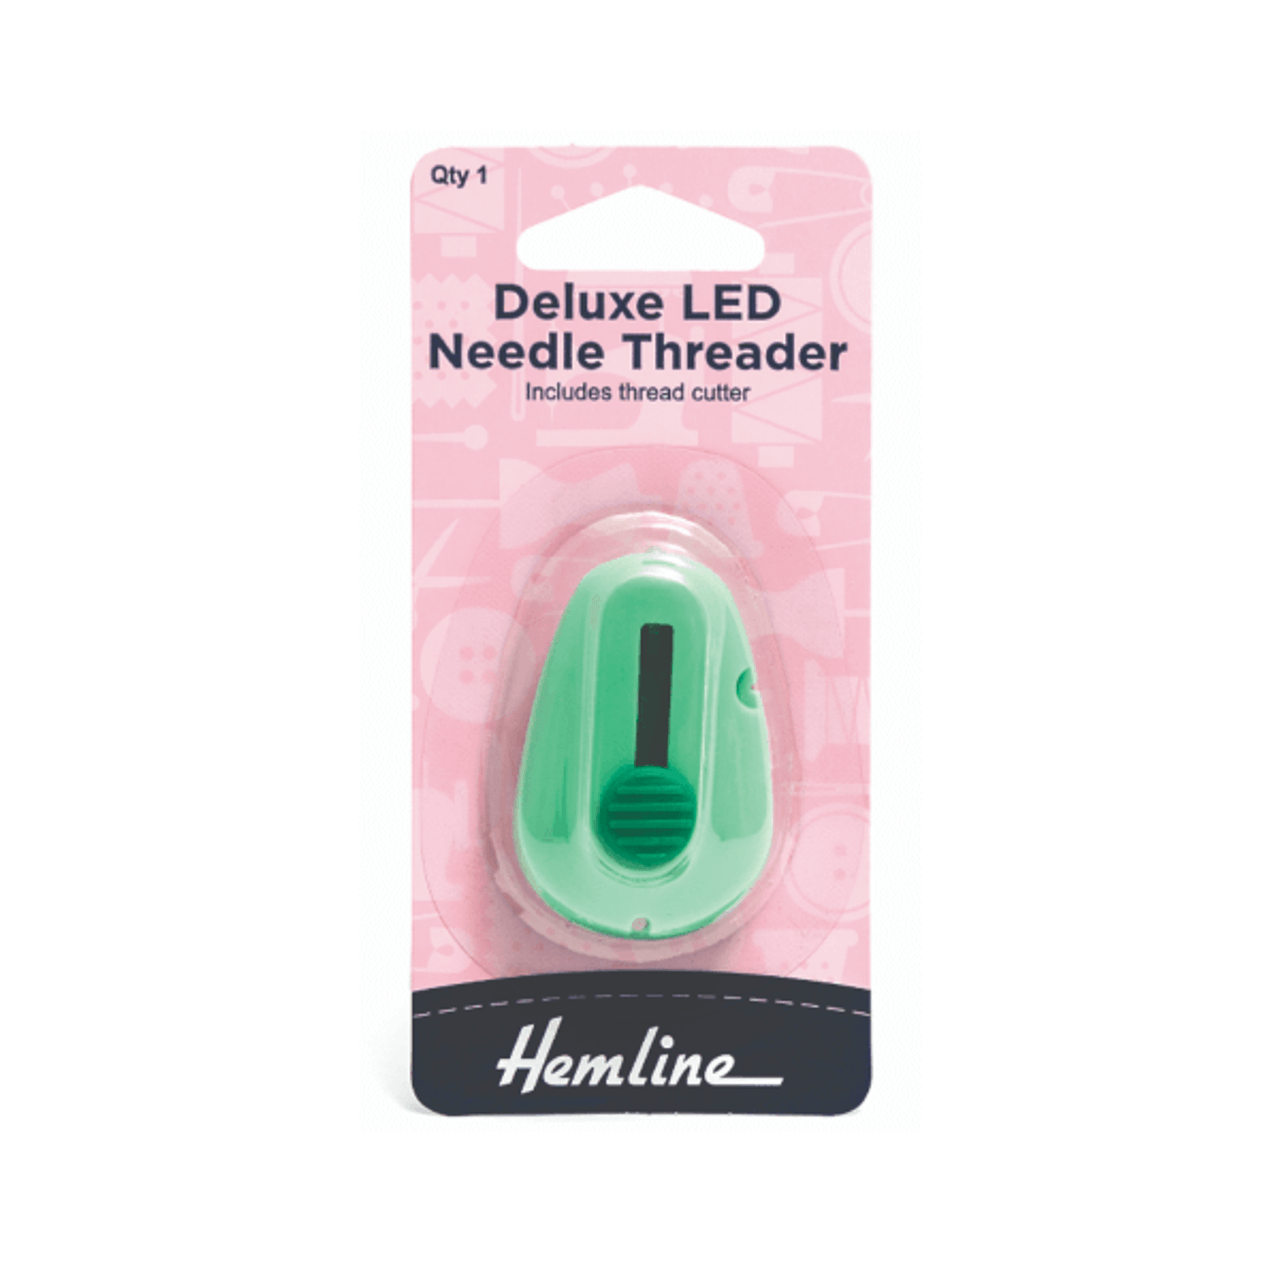 Deluxe LED Needle Threader with Thread Cutter